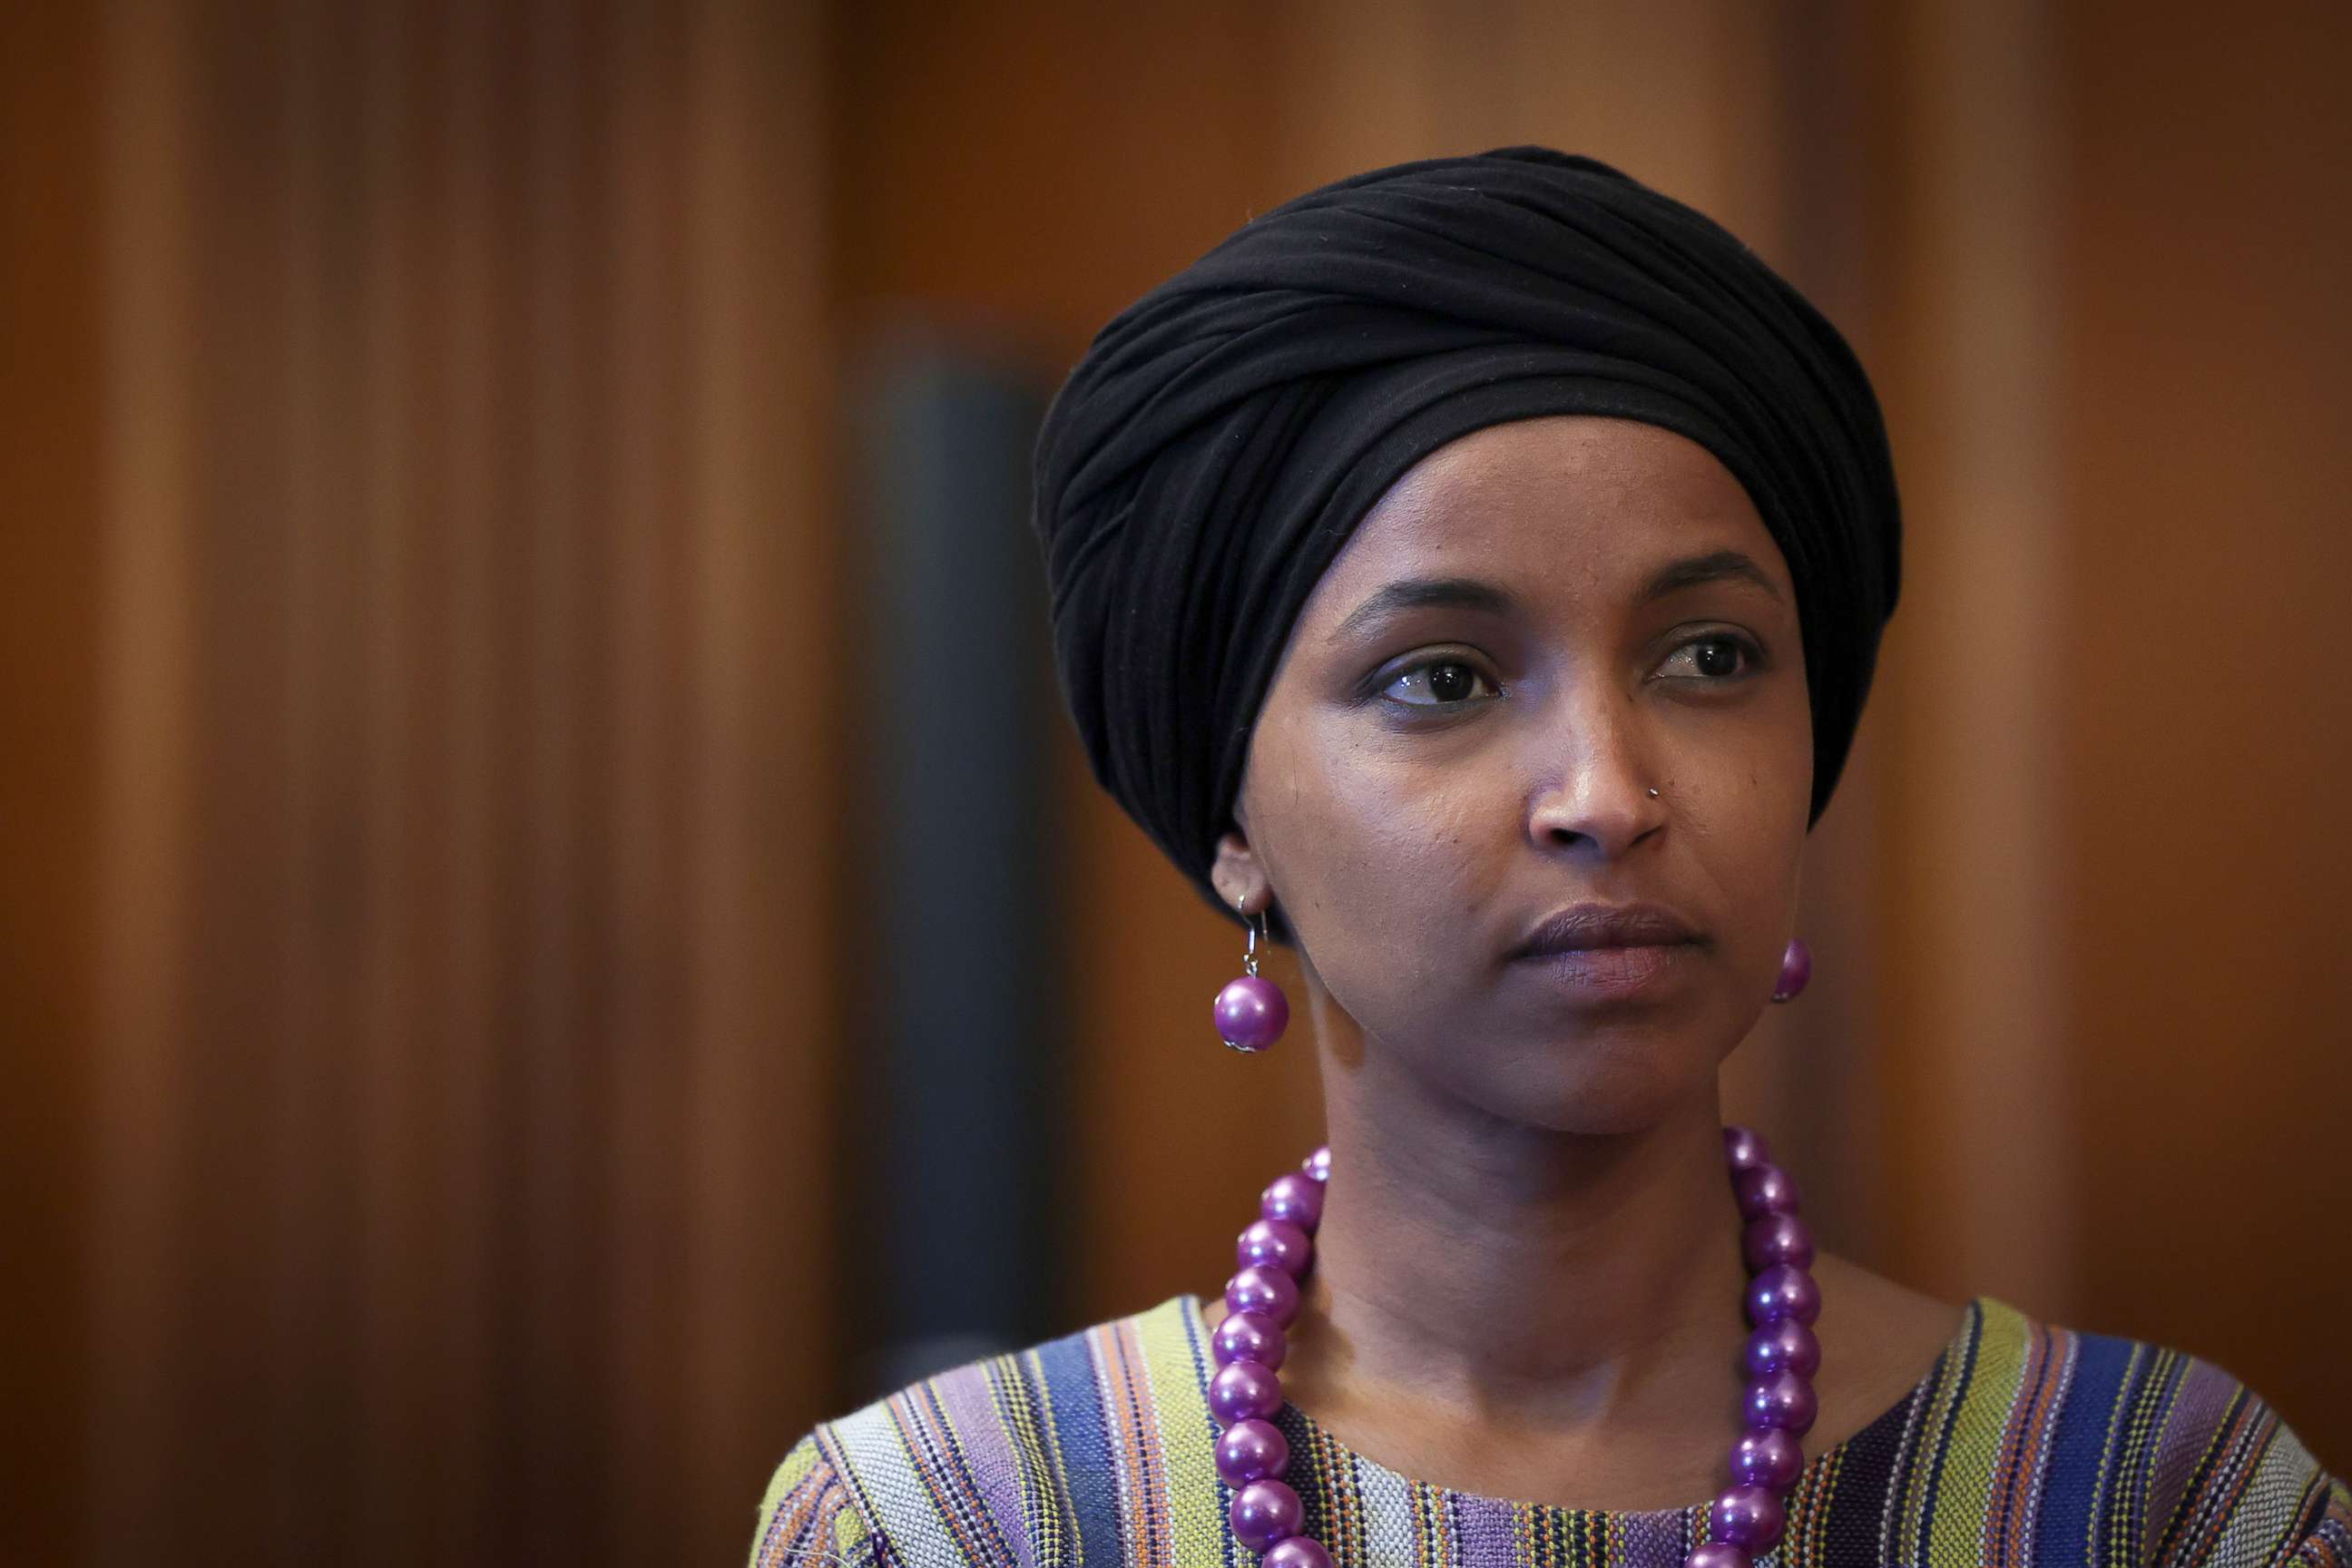 PHOTO: Rep. Ilhan Omar attends an event on Capitol Hill, July 20, 2022.